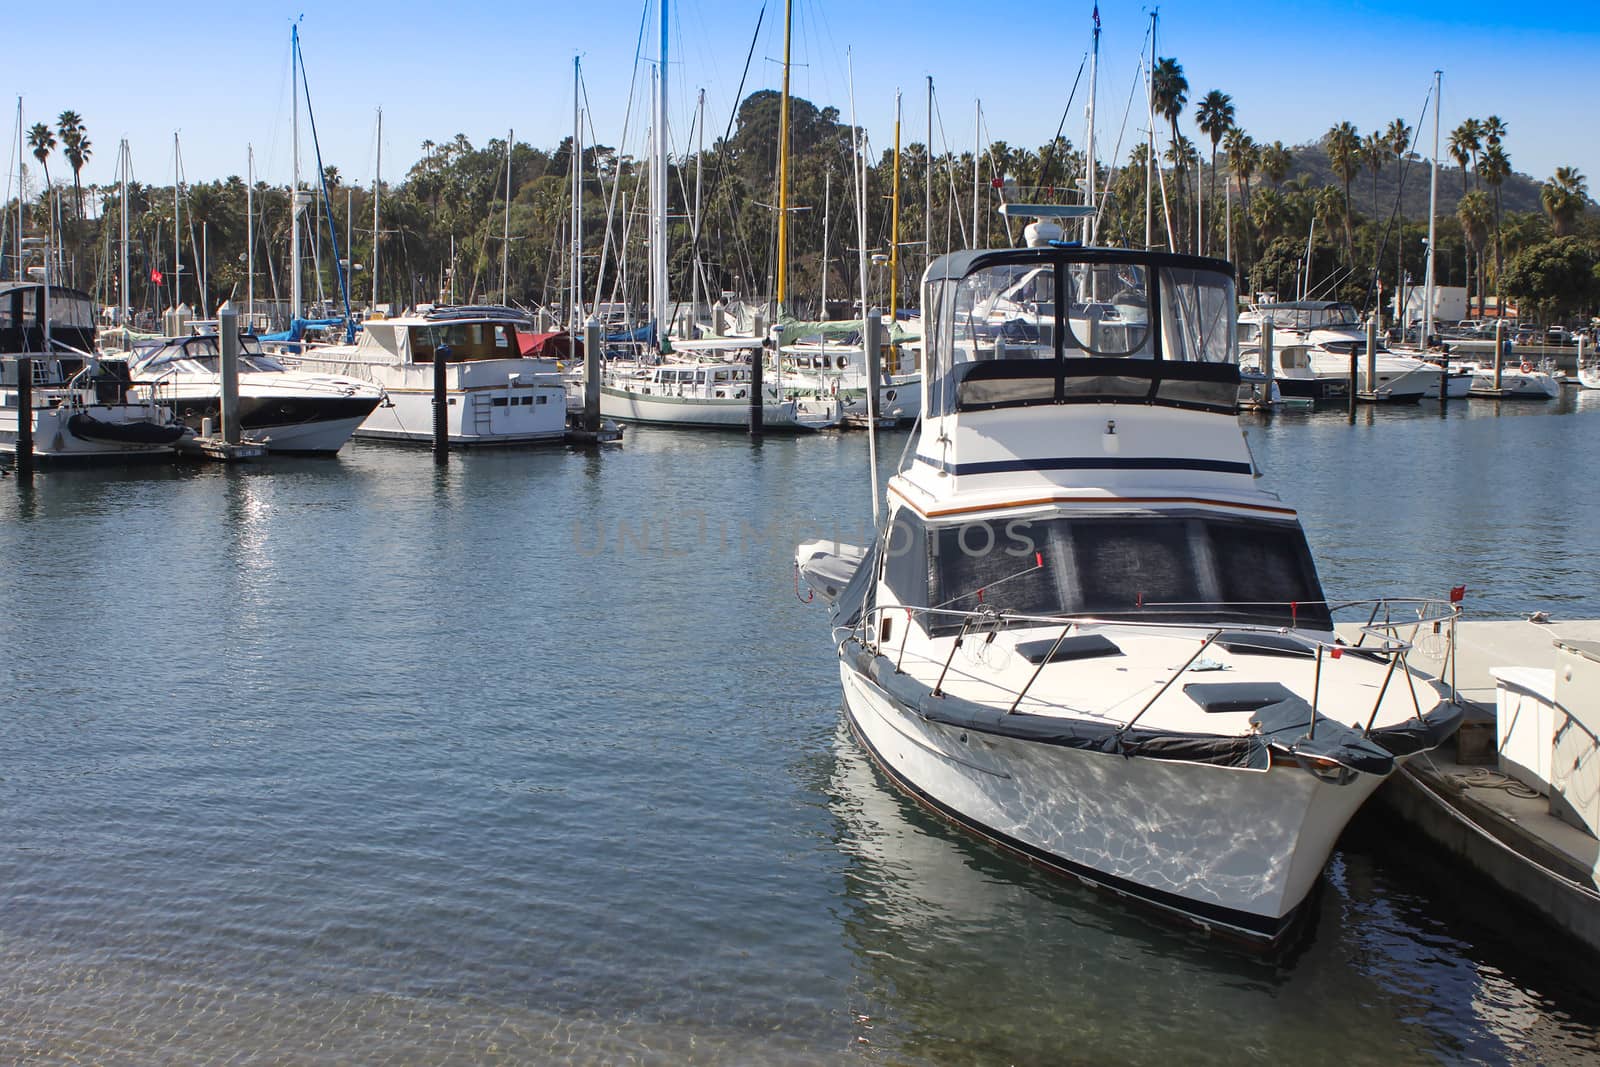 A beautiful of the Santa Barbara harbor. There are many boats, sailboats, yachts and dingy floating while tied up in a slip.







A beautiful of the Santa Barbara harbor. There are many boats, sailboats, yachts and dingys floating while tied up in a slip.